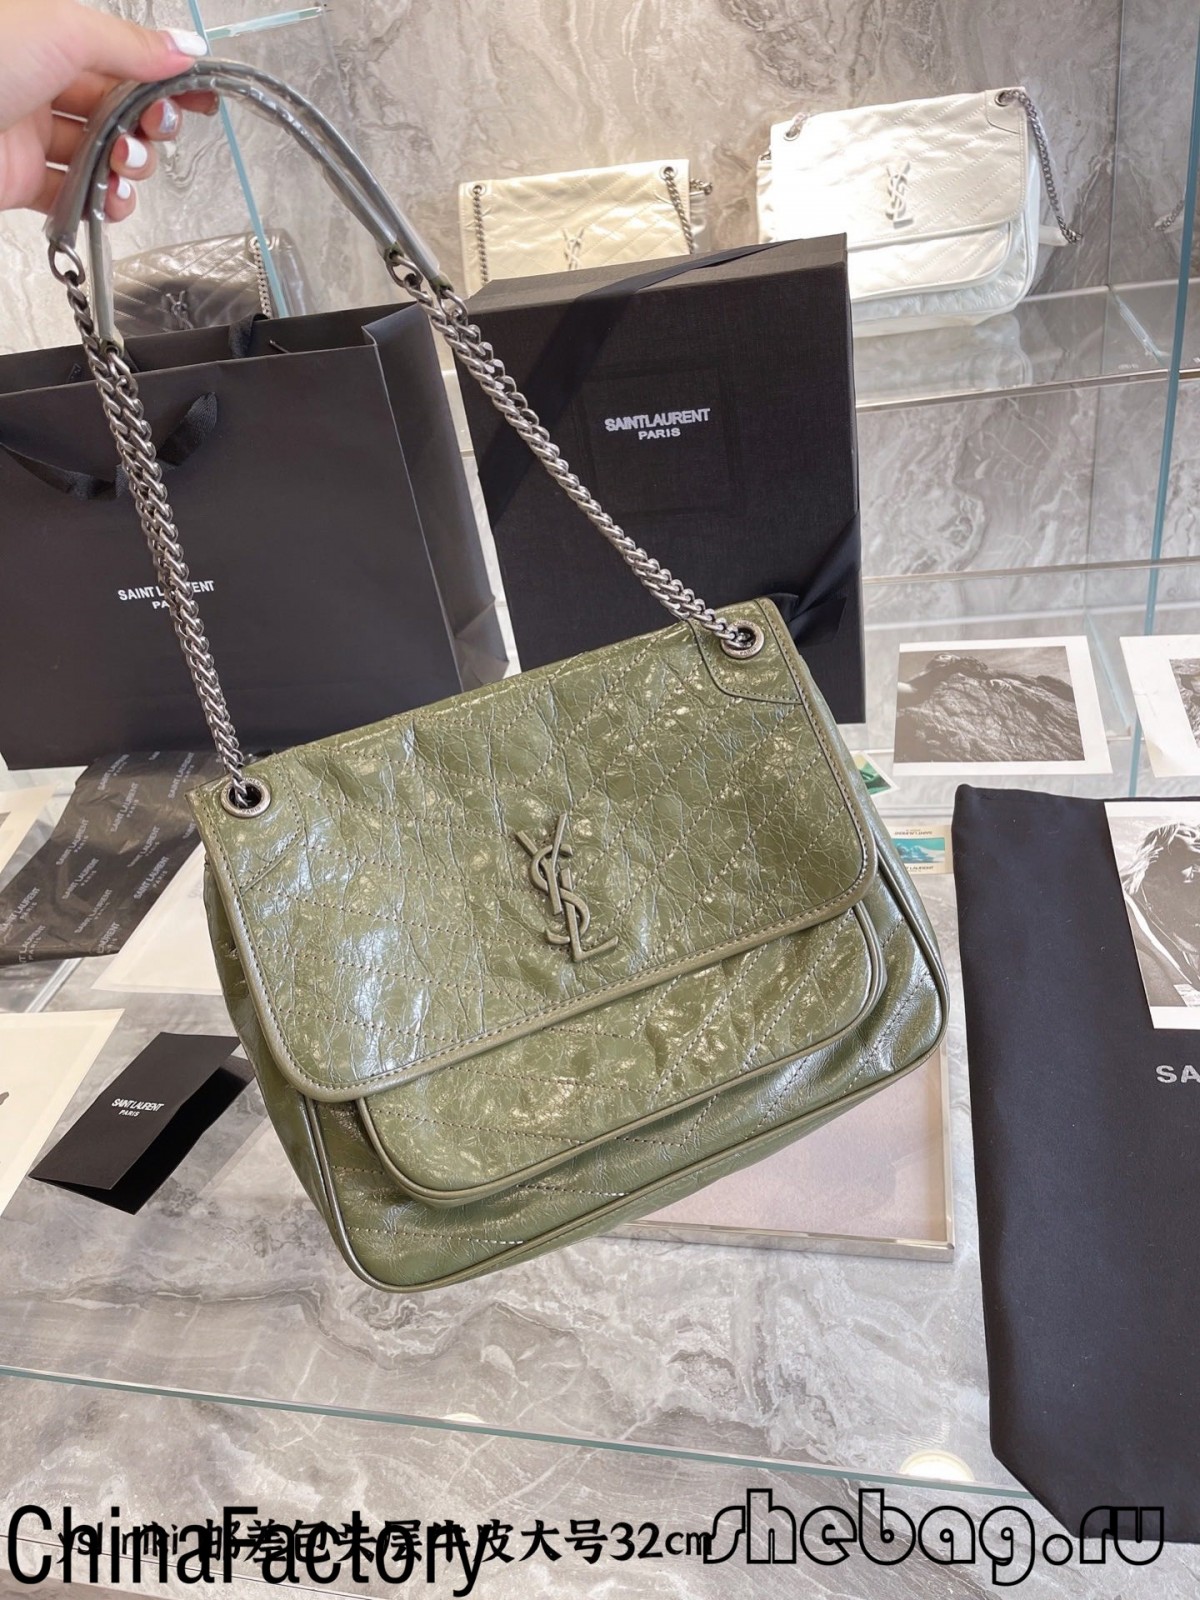 Where can I buy YSL replica bags？4 ways recommended (2022 Latest)-Best Quality Fake Louis Vuitton Bag Online Store, Replica designer bag ru